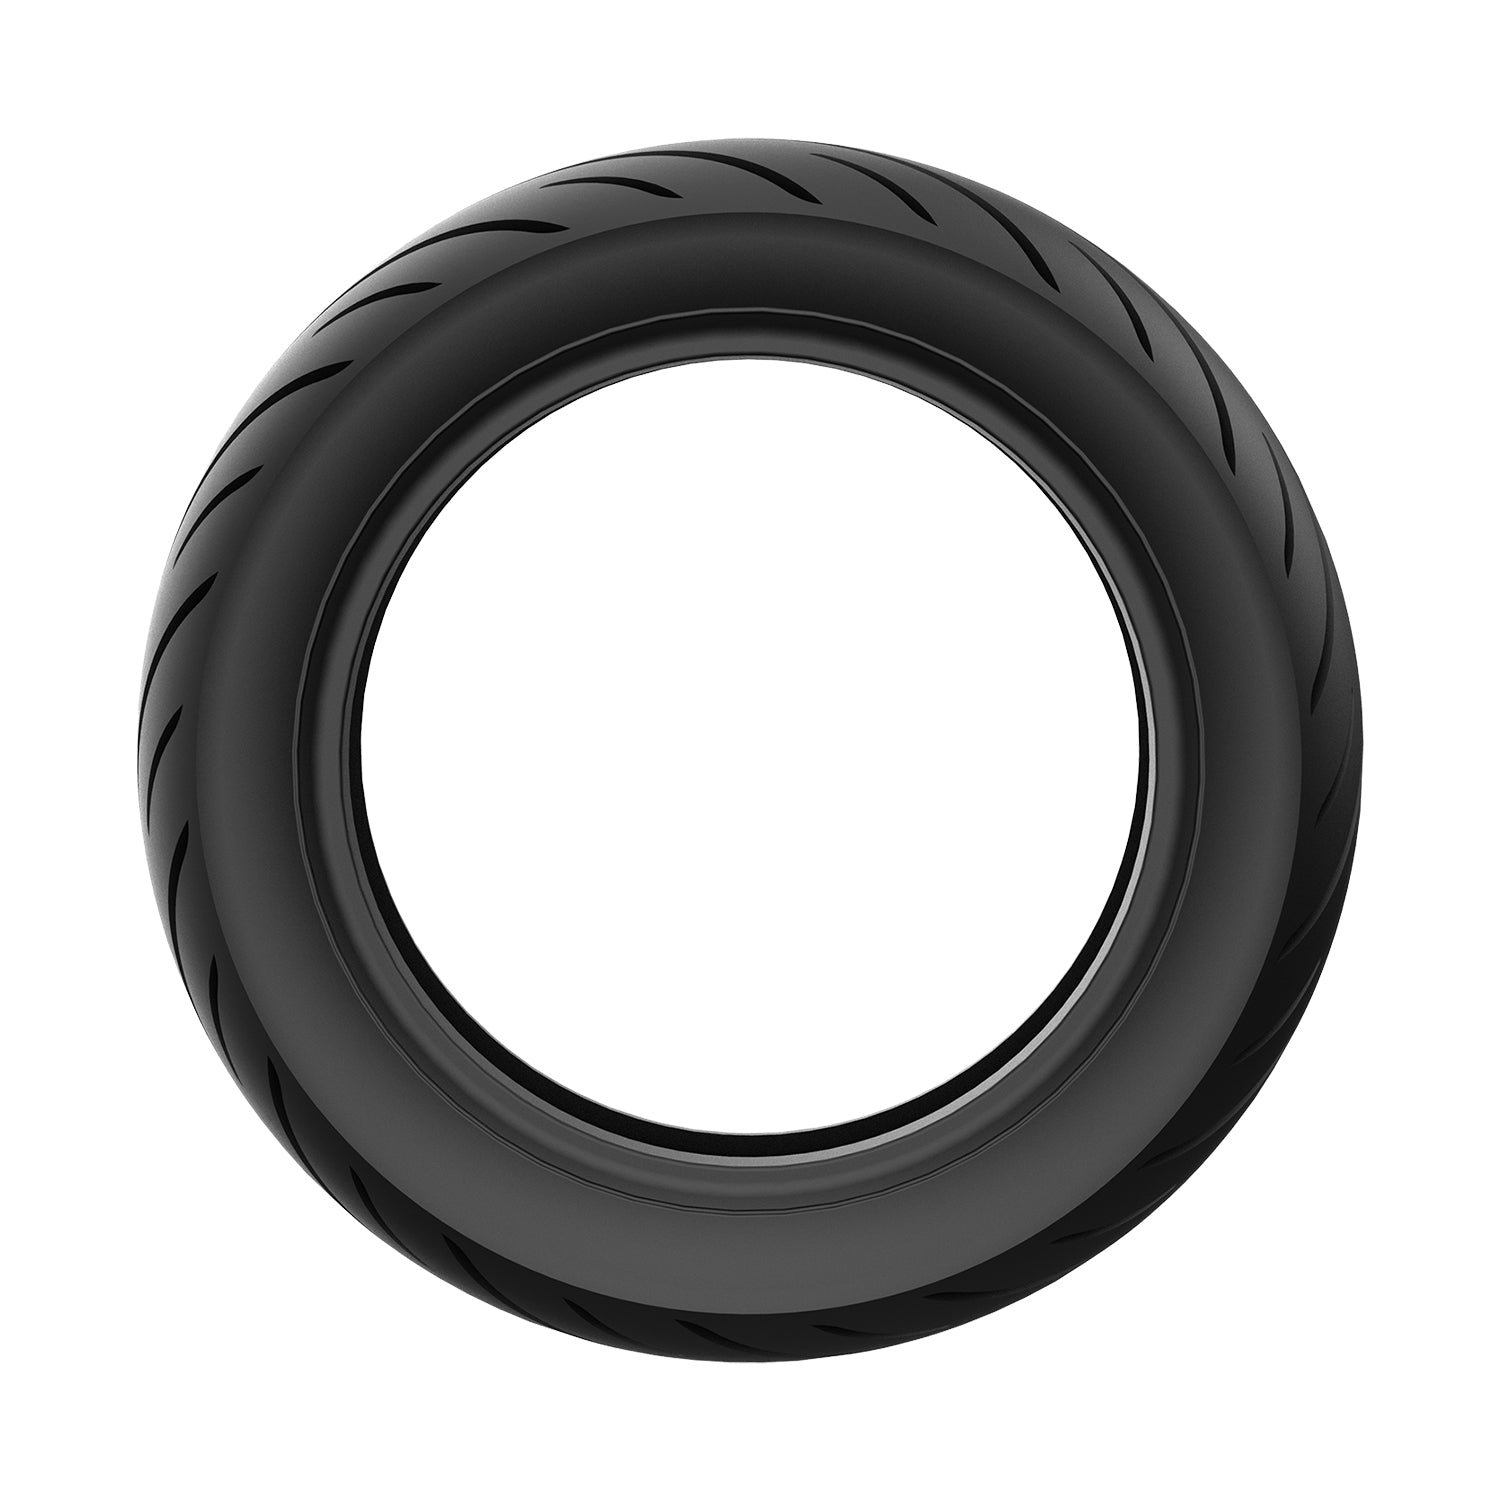 NIU tires for KQi2 Scooters